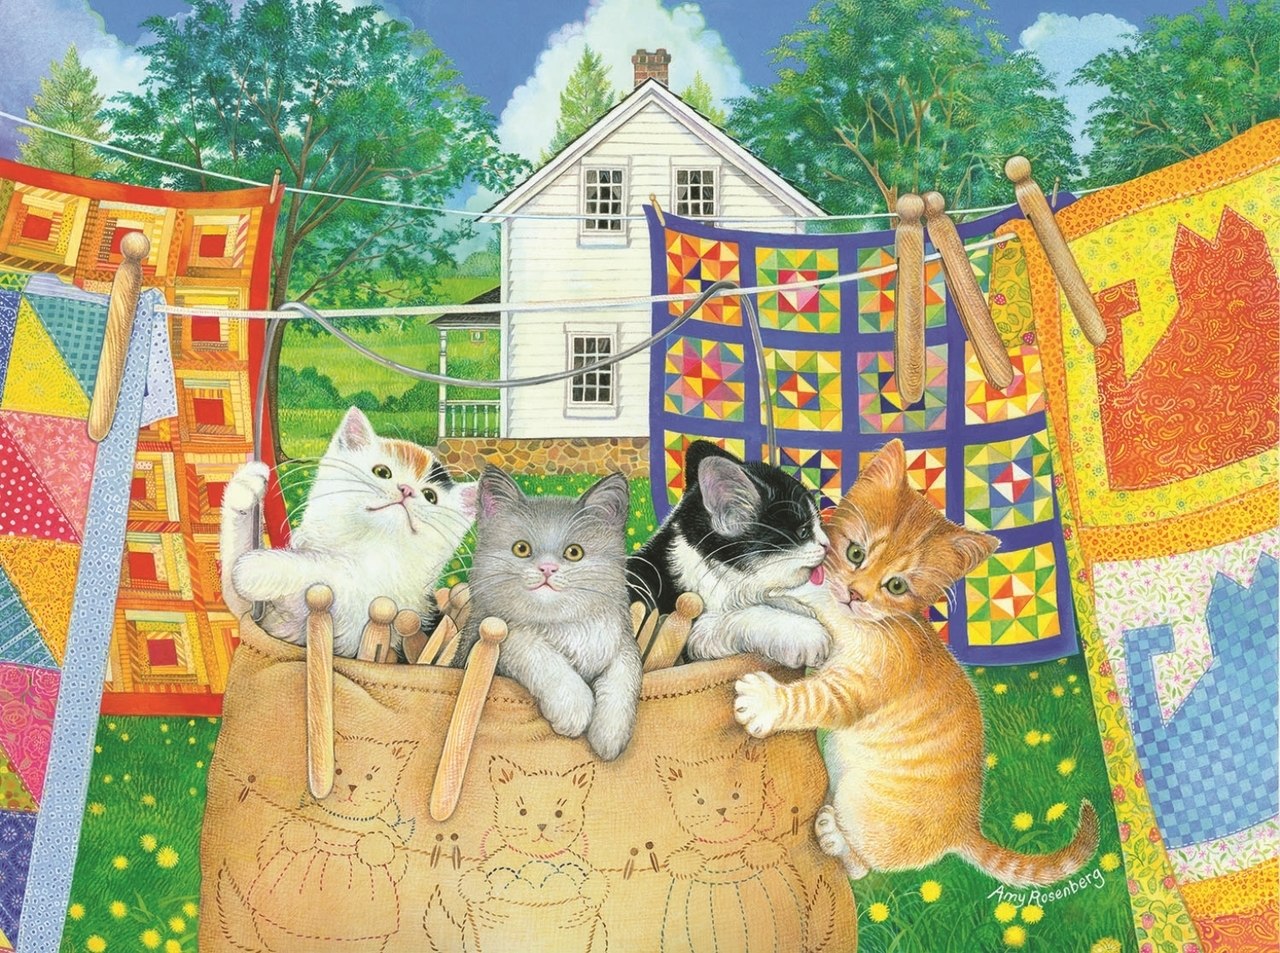 Clothesline Kittens - 500pc Jigsaw Puzzle By Sunsout  			  					NEW